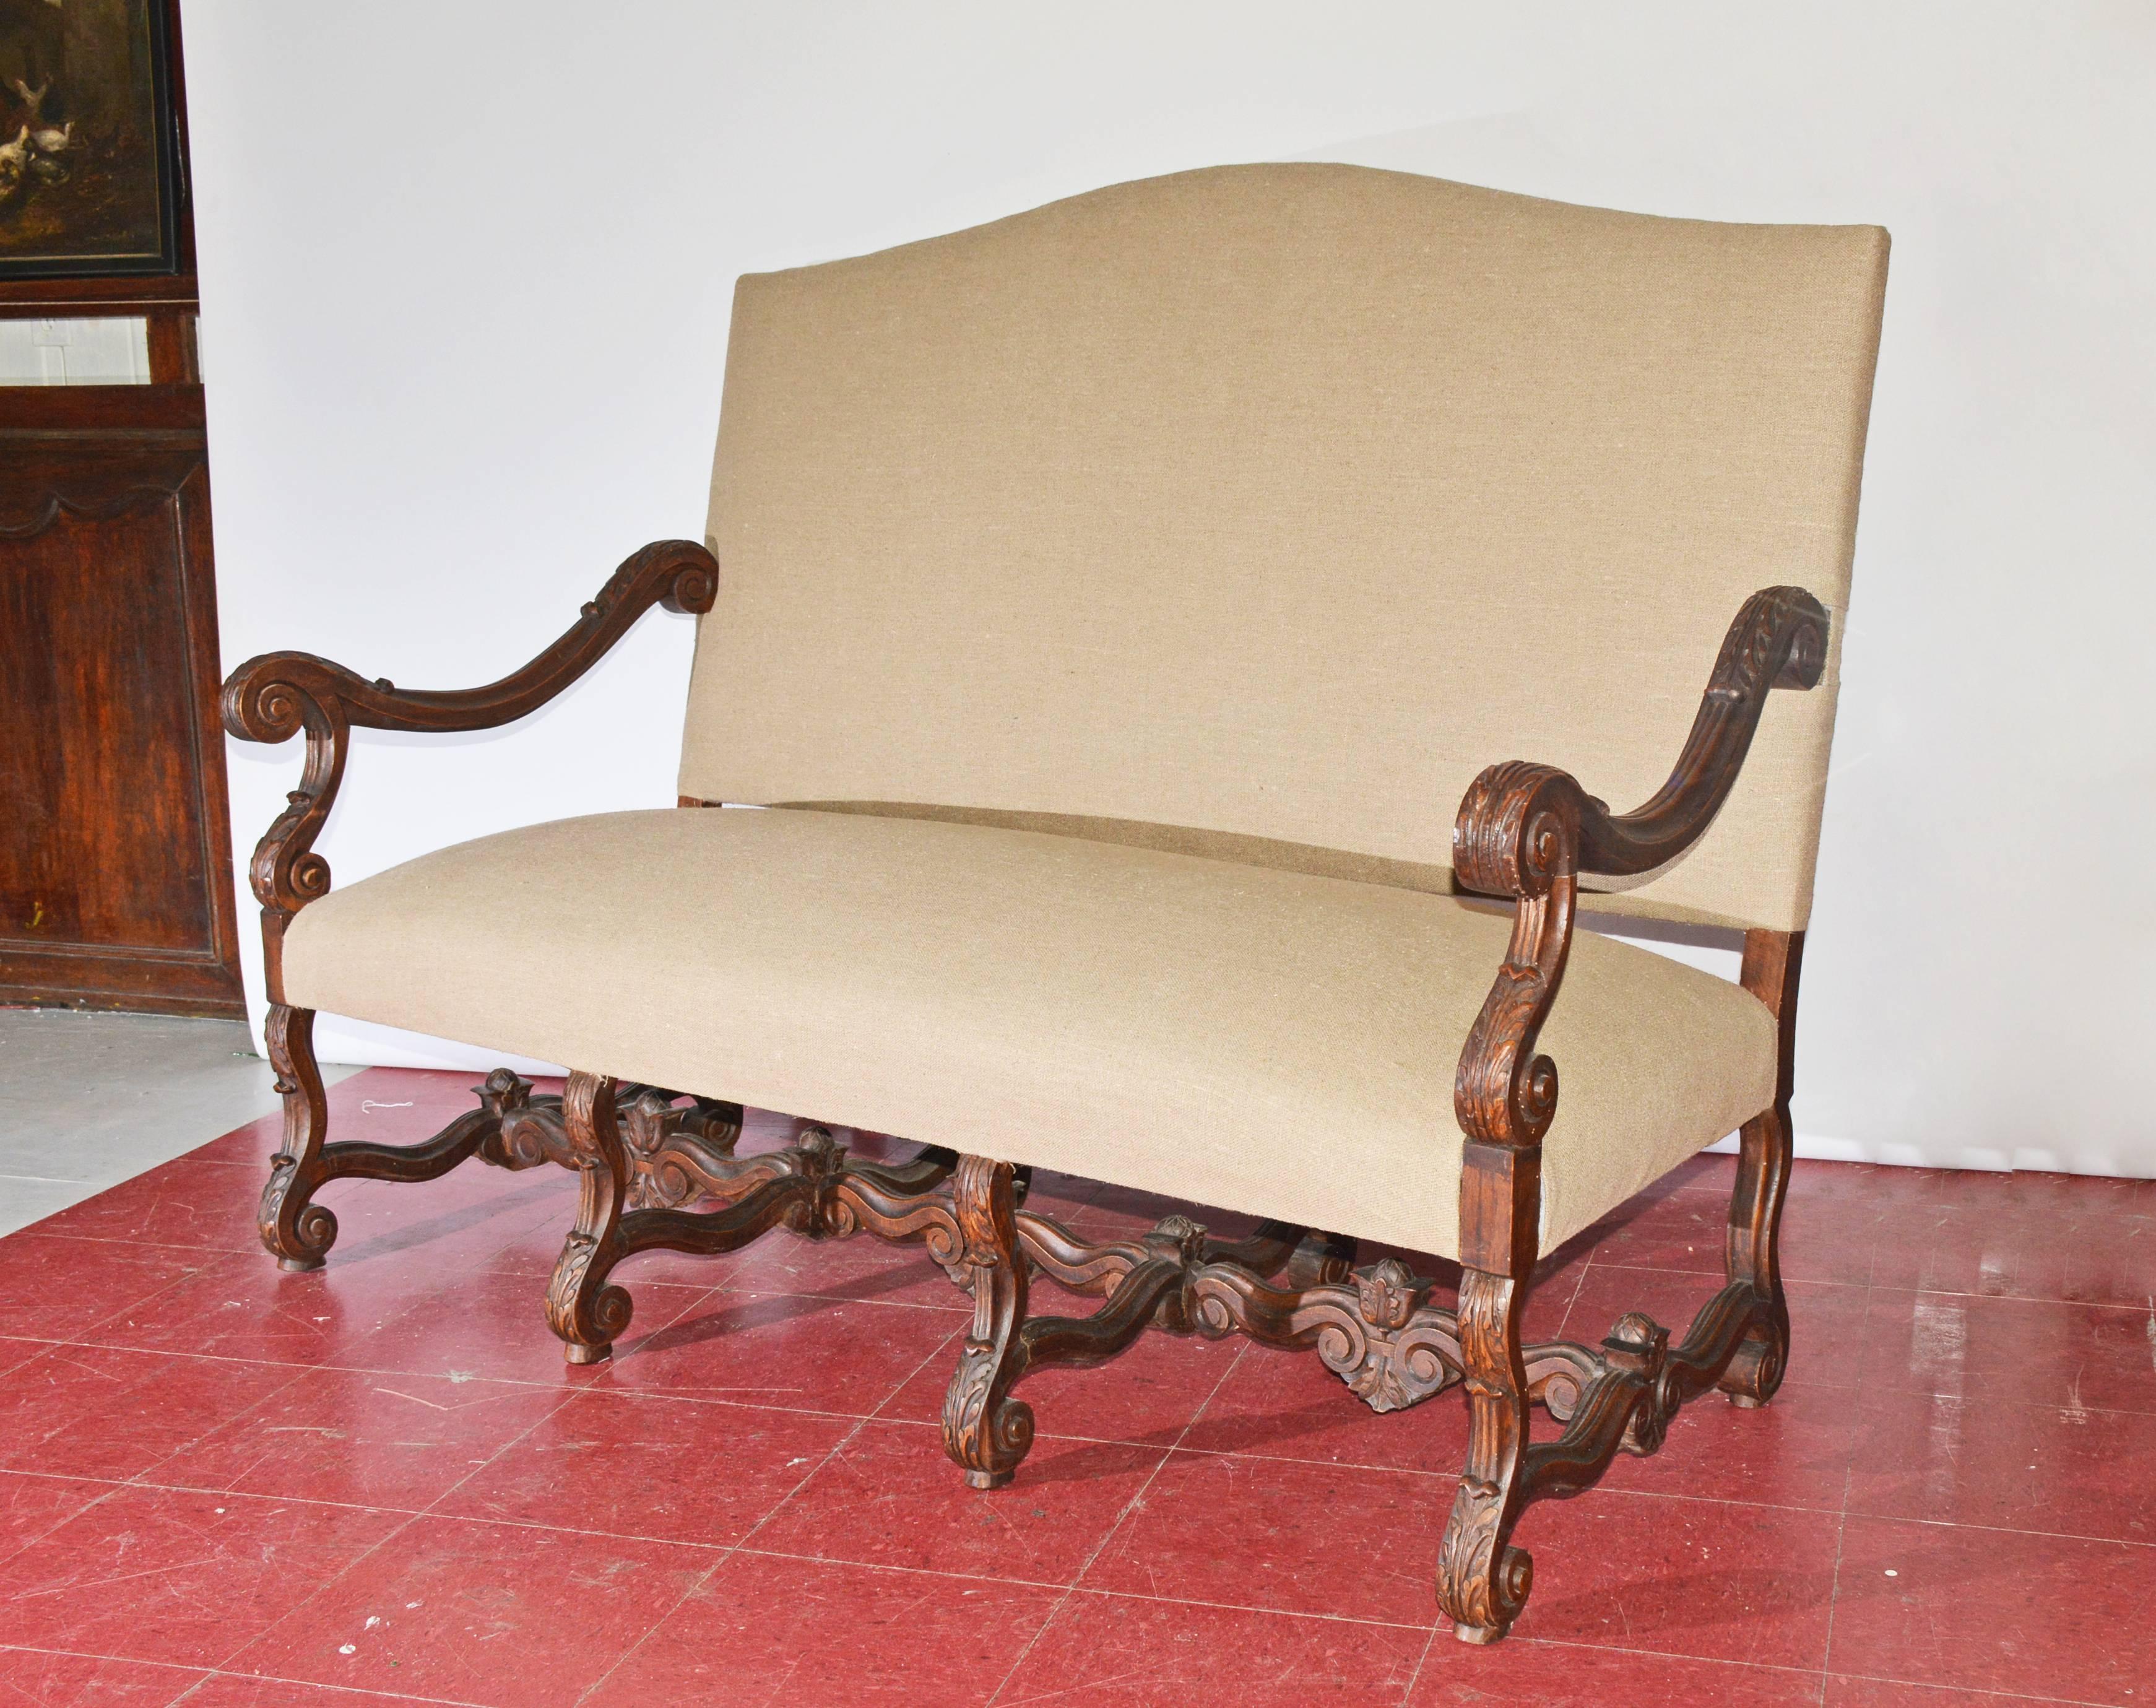 The Louis XV or Baroque Thorne style sofa or settee has hand-carved oak arms, legs and stretchers decorated with leaves and curling volutes. The newly applied upholstery is light brown linen. The seat is cushioned with padding and steel